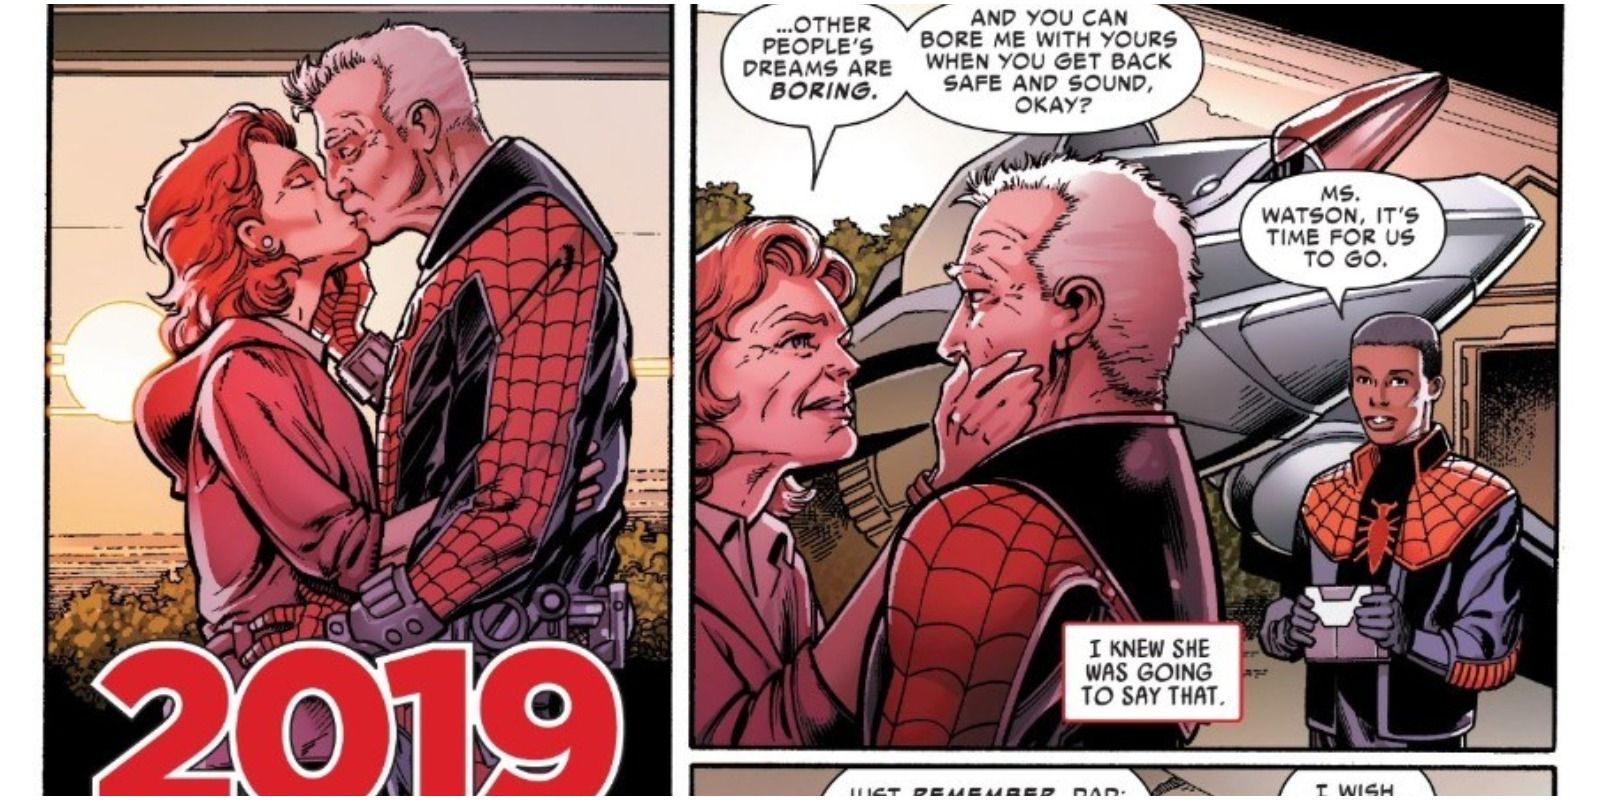 Mary Jane says goodbye to Peter in Spider-Man Marvel comics